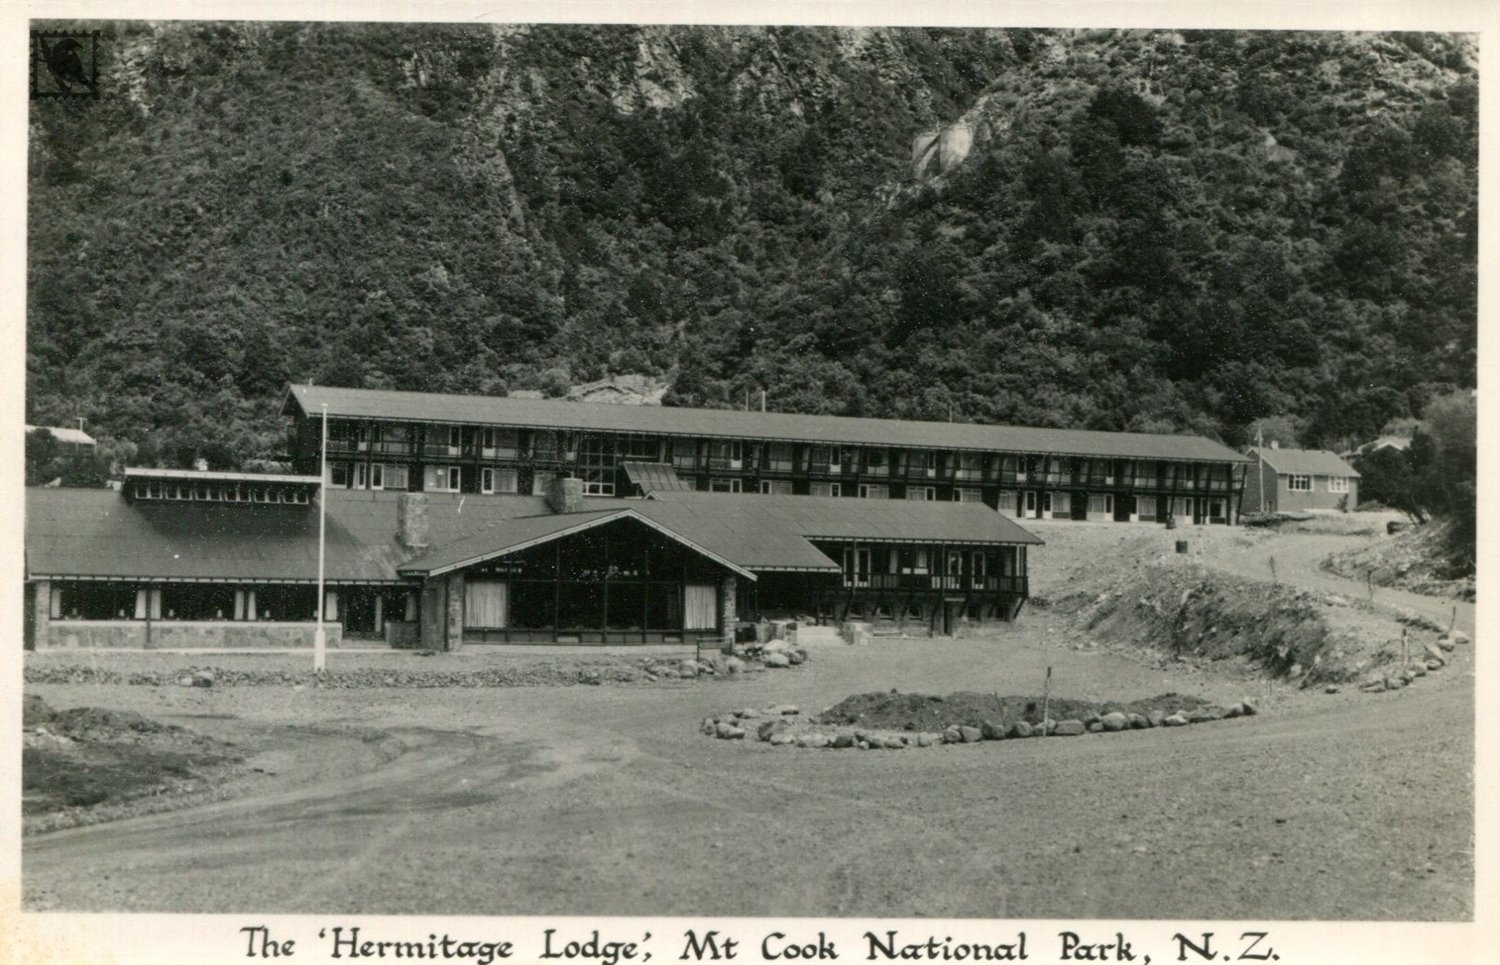 Mount Cook - The Hermitage Lodge